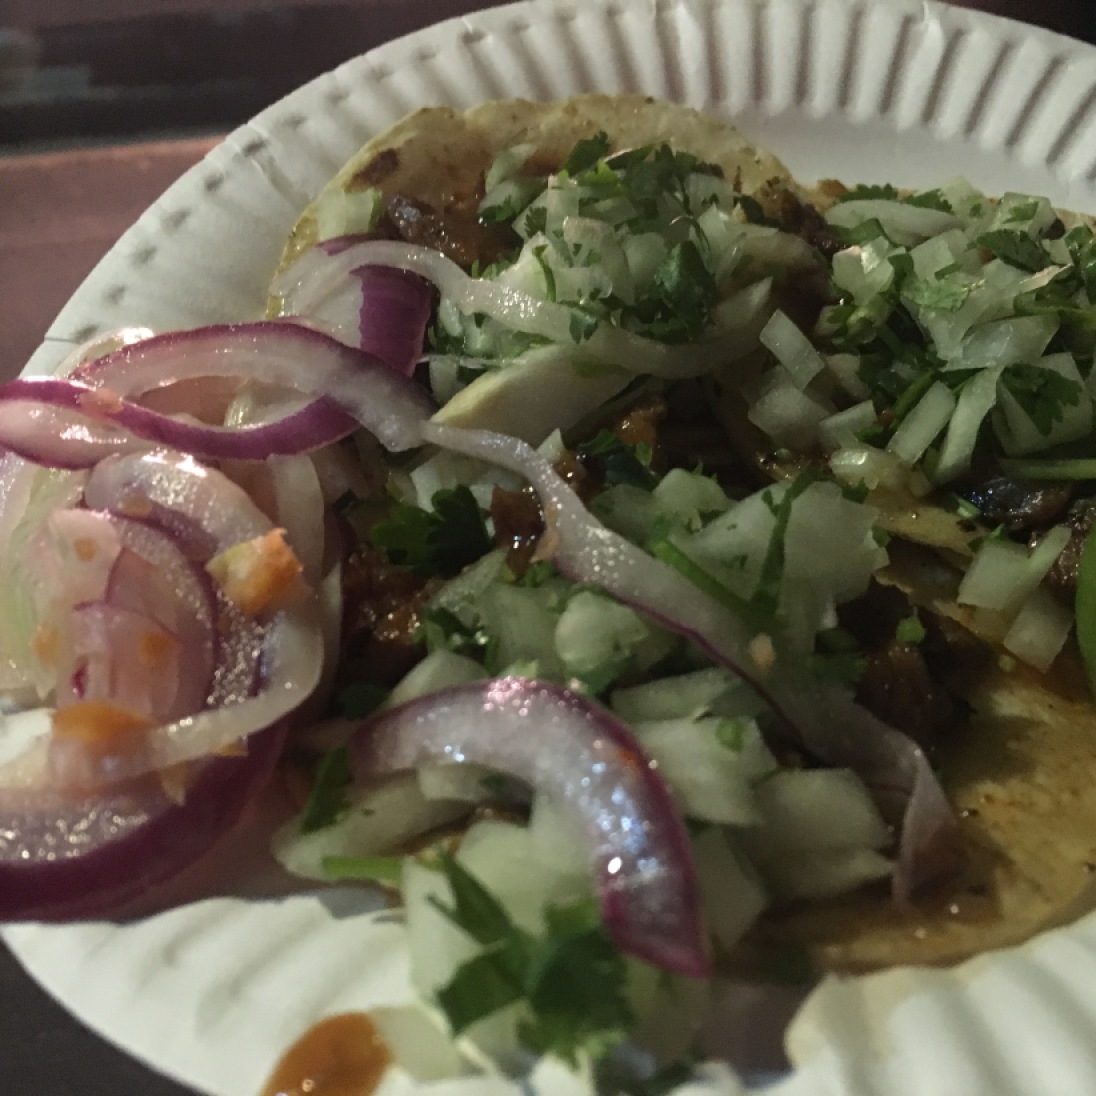 Al Pastor tacos are a speciality of Avenue 26. Tacos normally come with just meat and tortilla, additions are found further down the line of the stand.